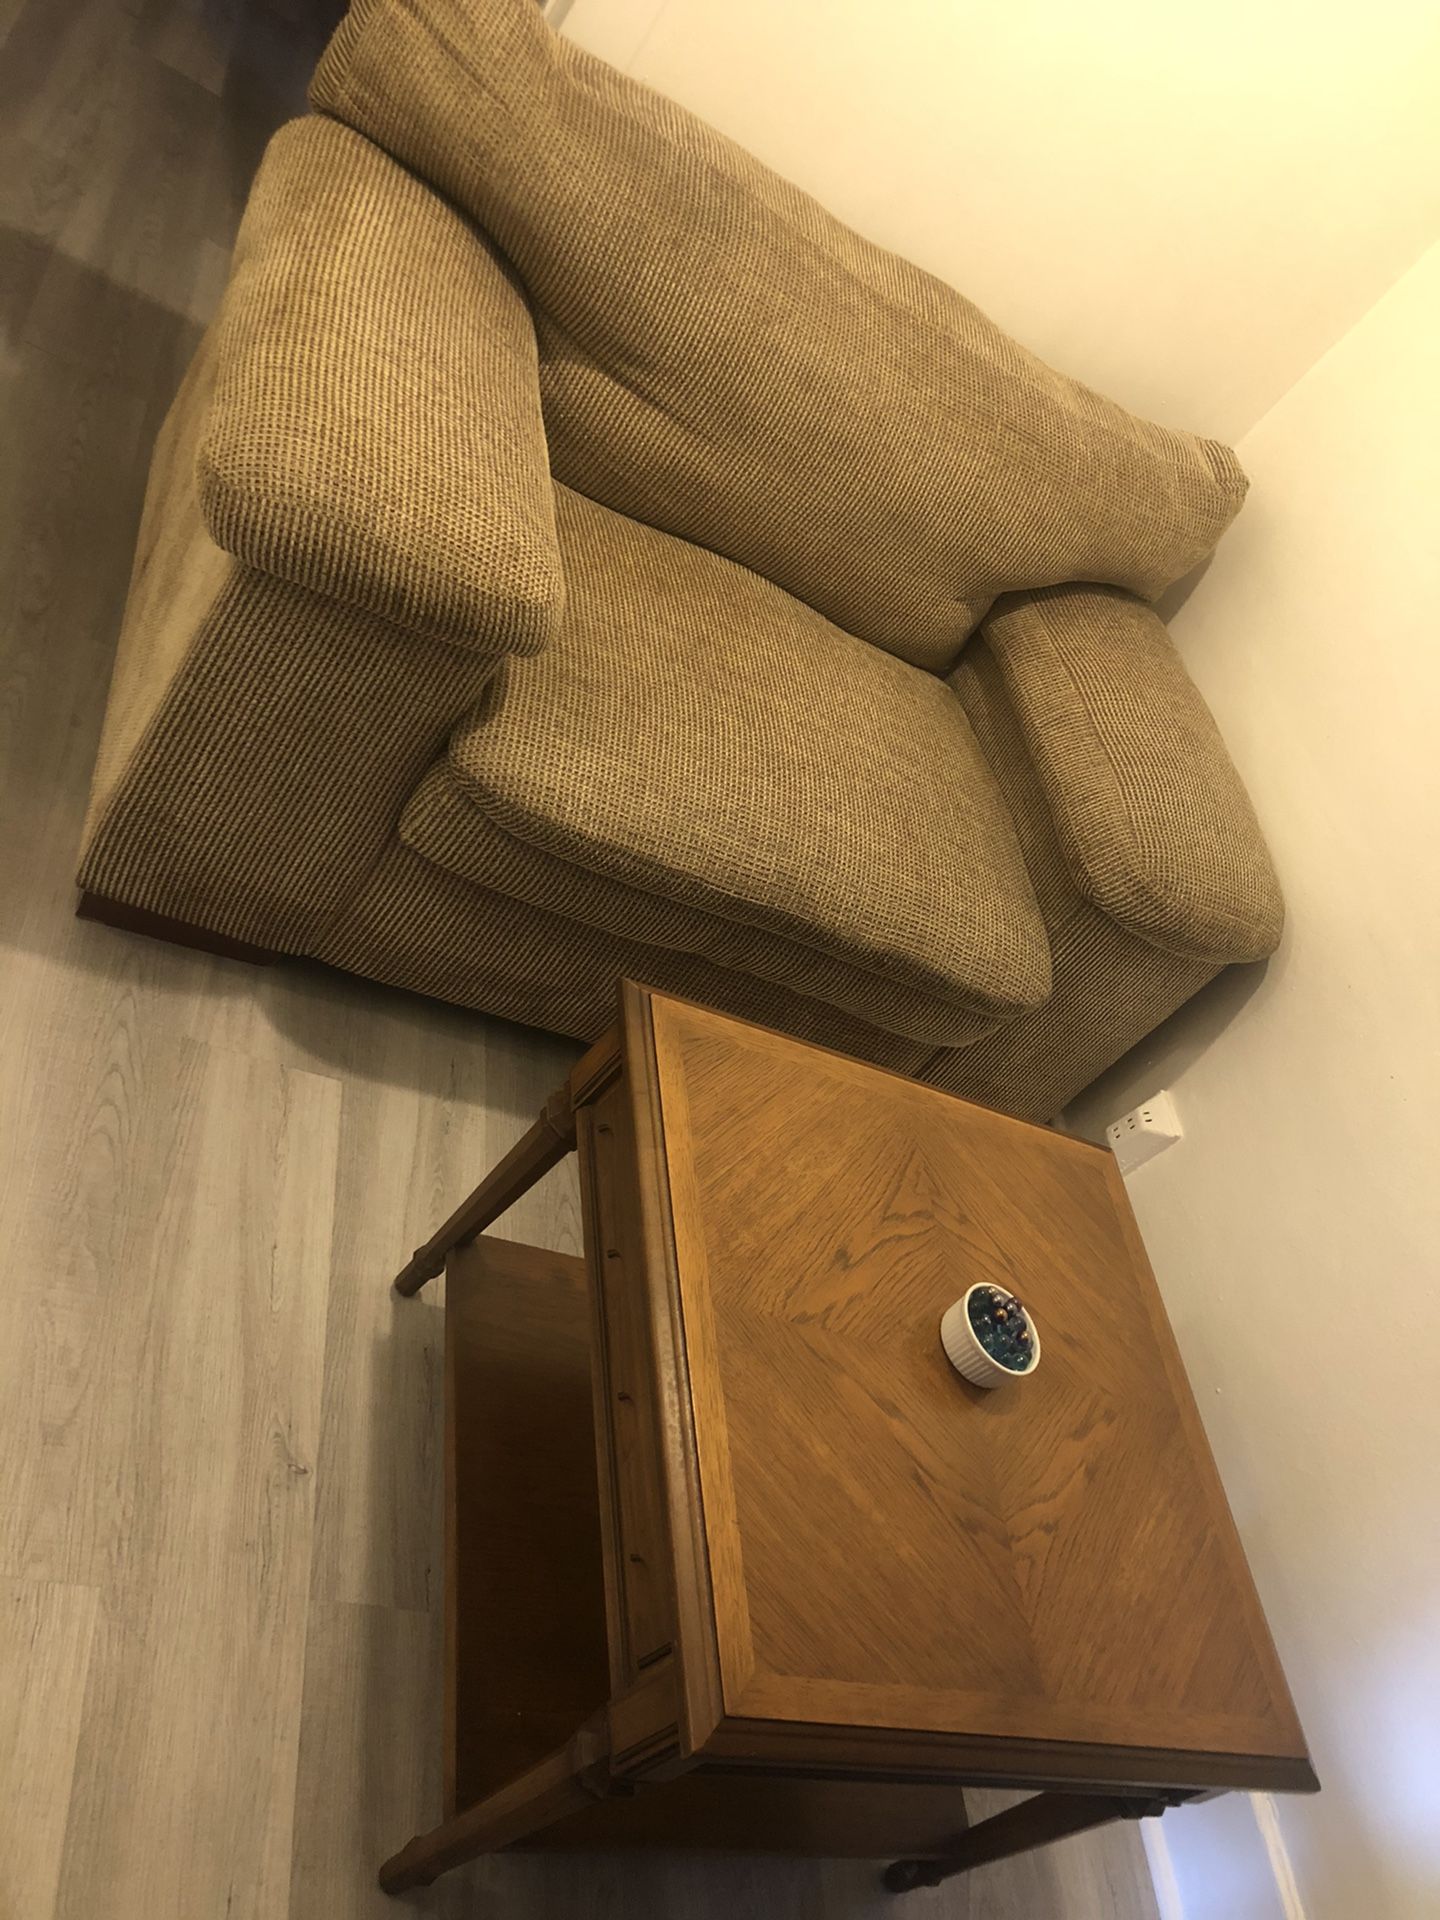 Free chair couch. Super clean and comfortable zip 33137